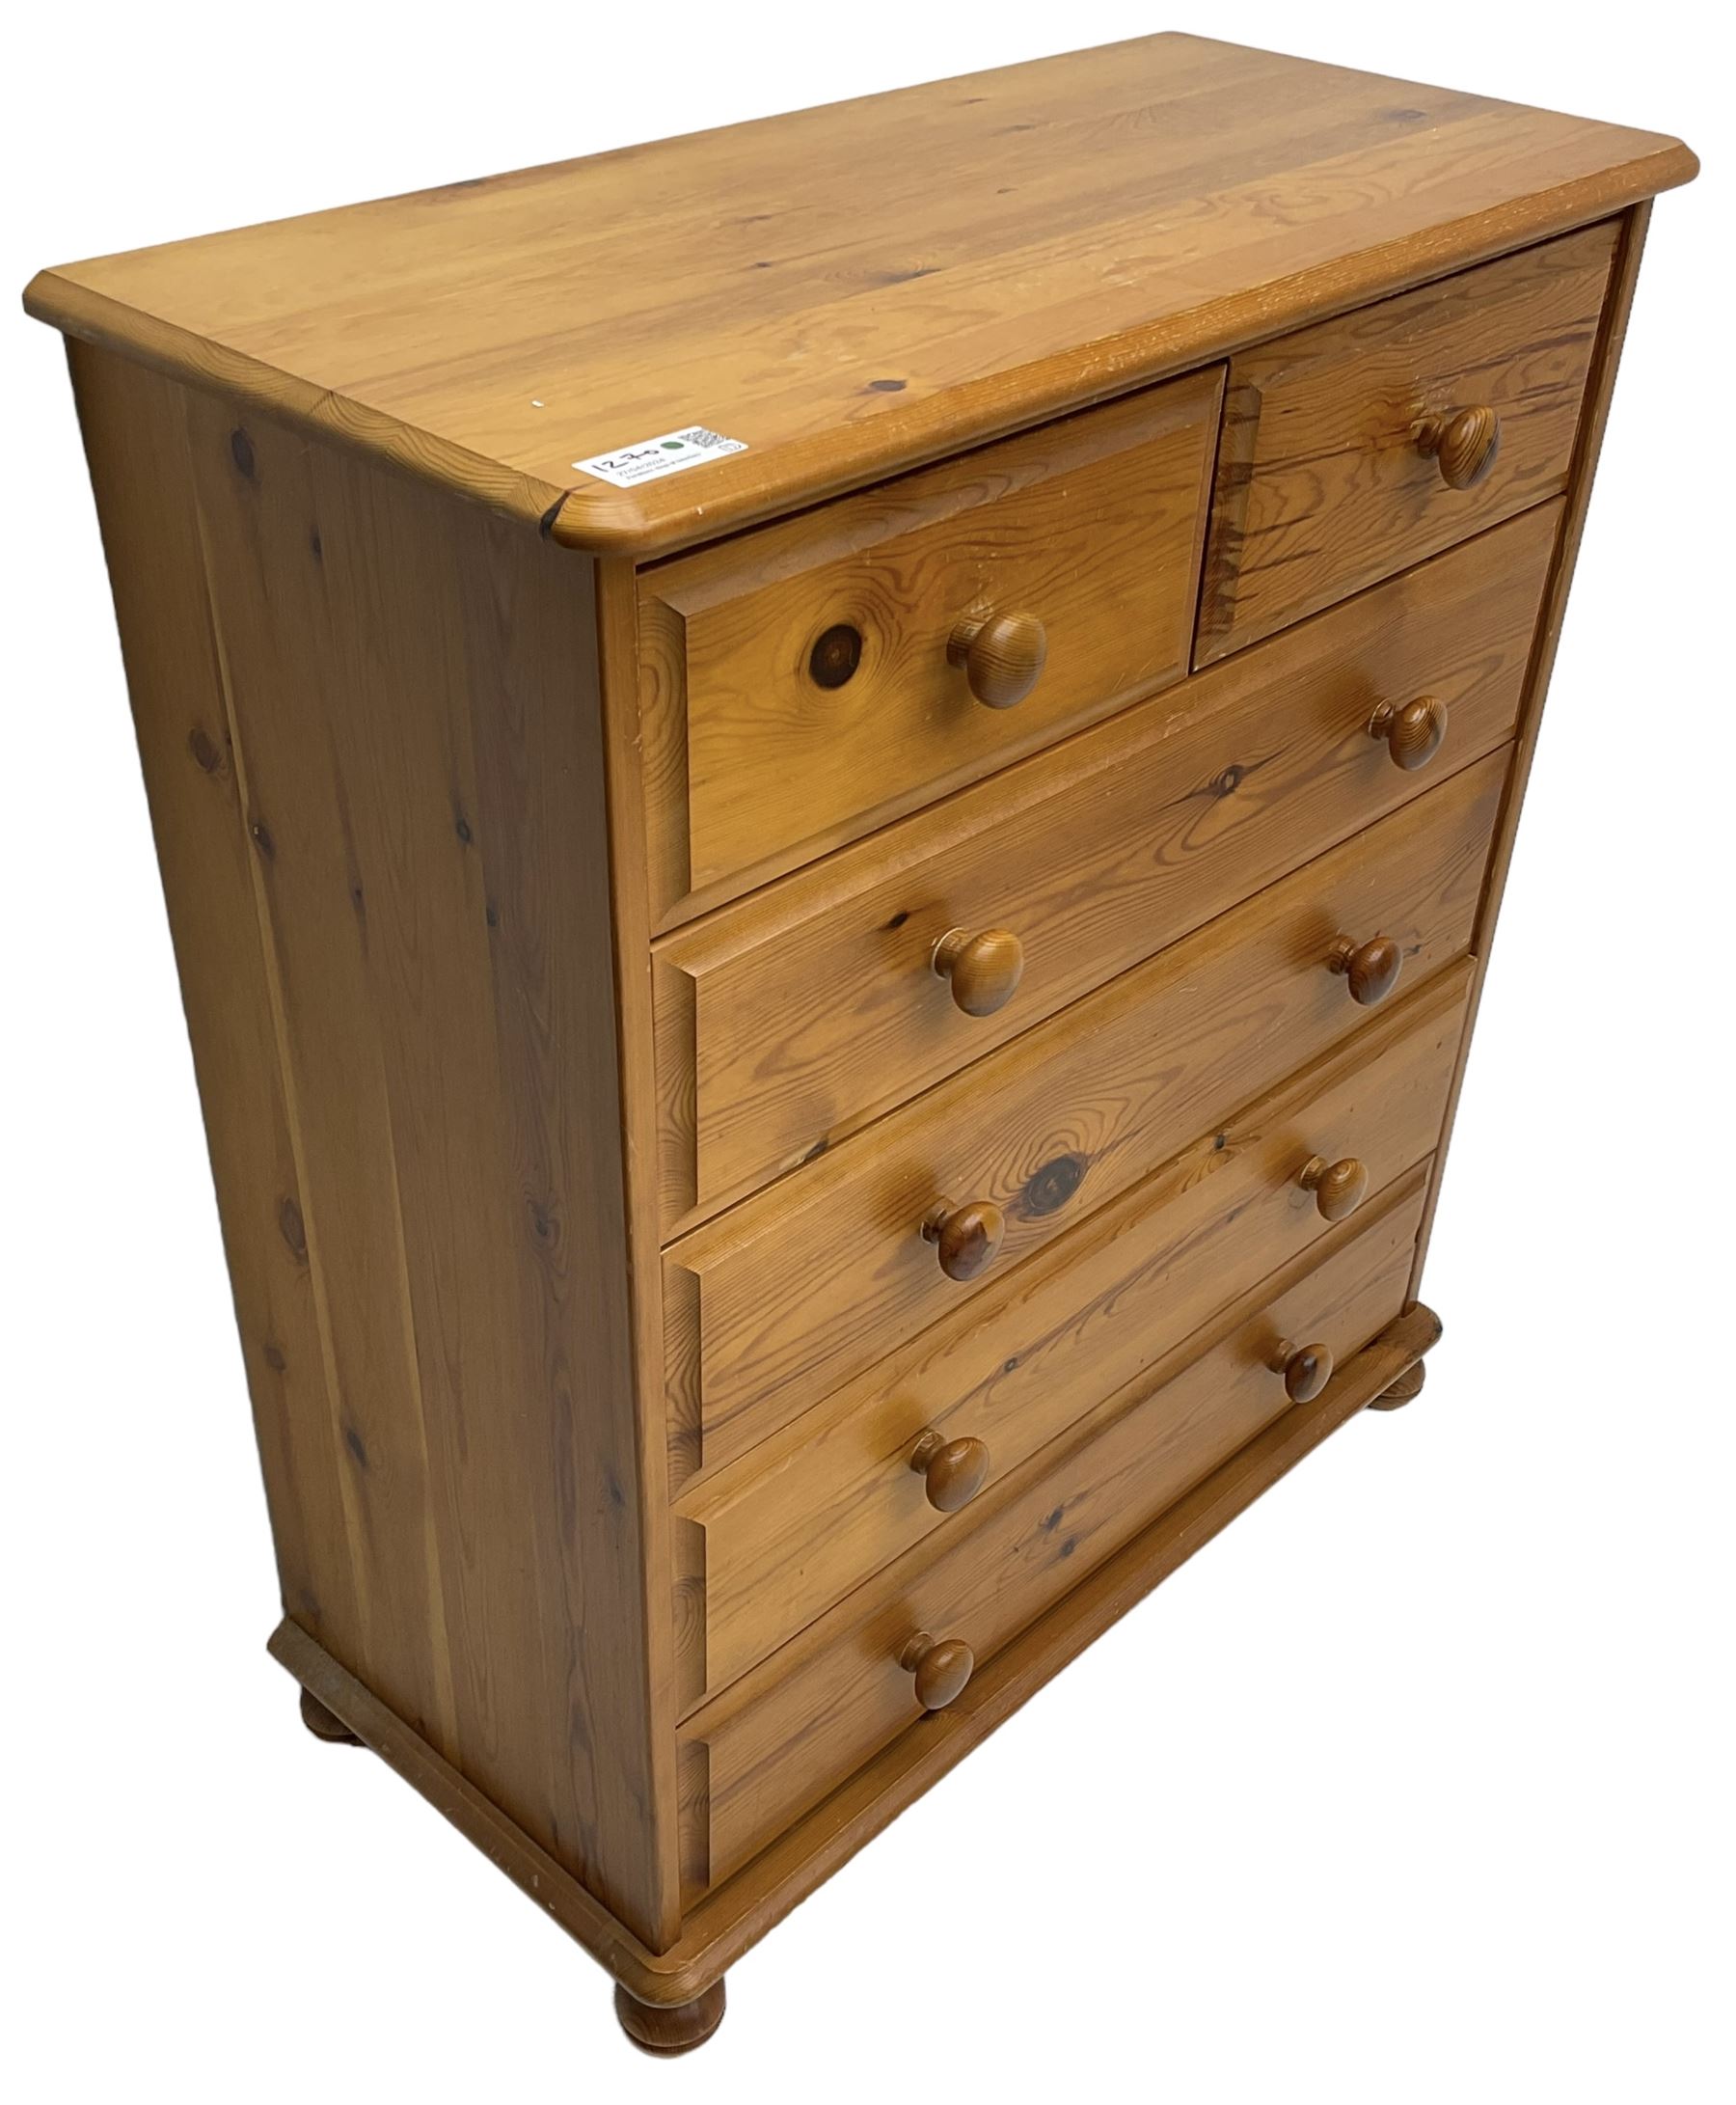 Polished pine chest - Image 11 of 12